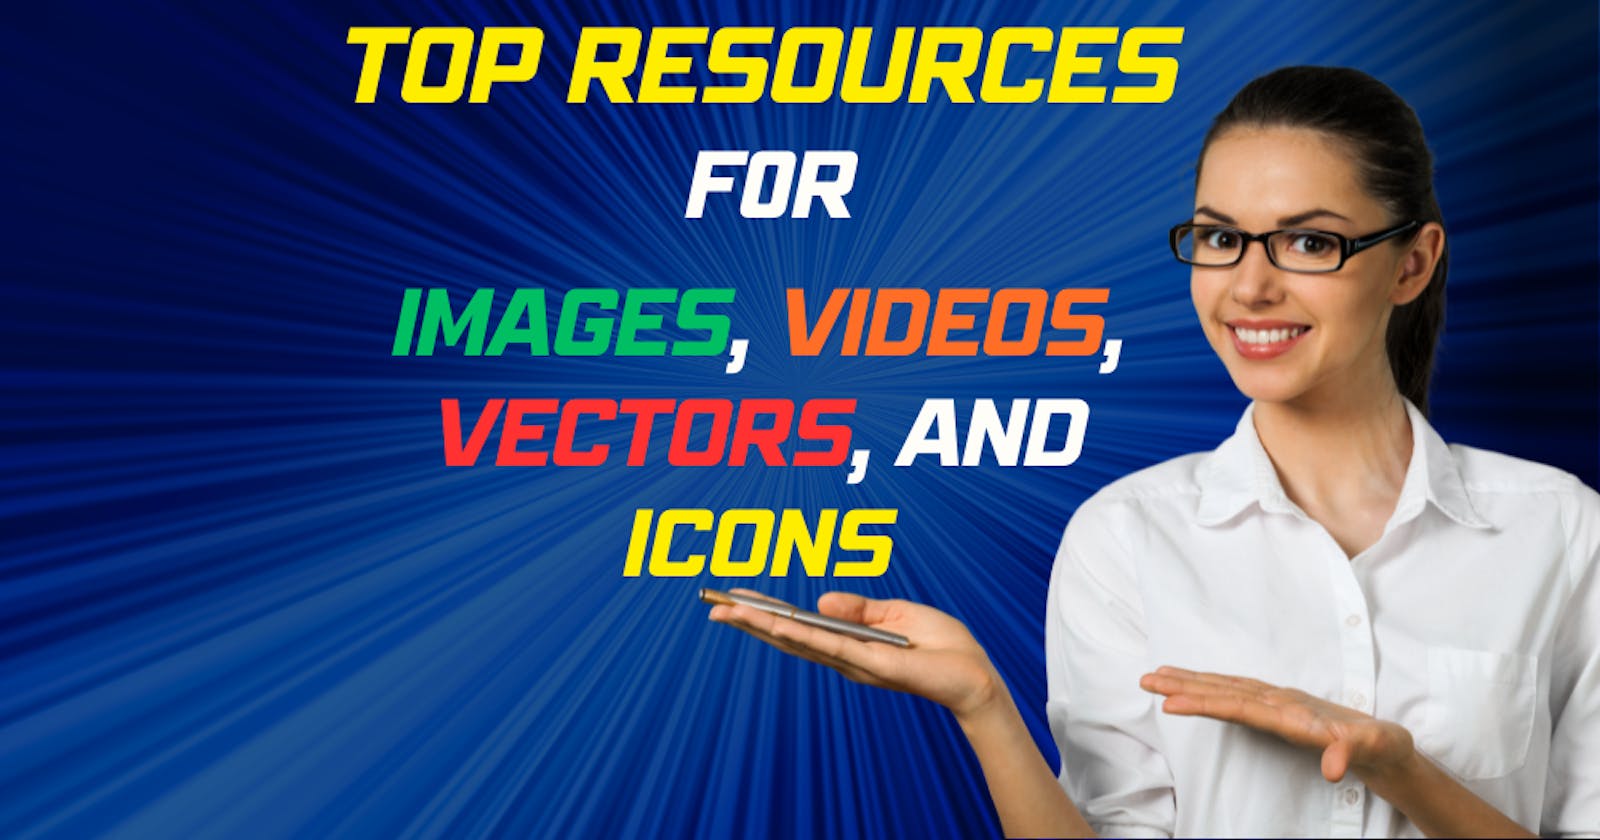 Top Resources for High-Quality Images, Vectors, and Icons